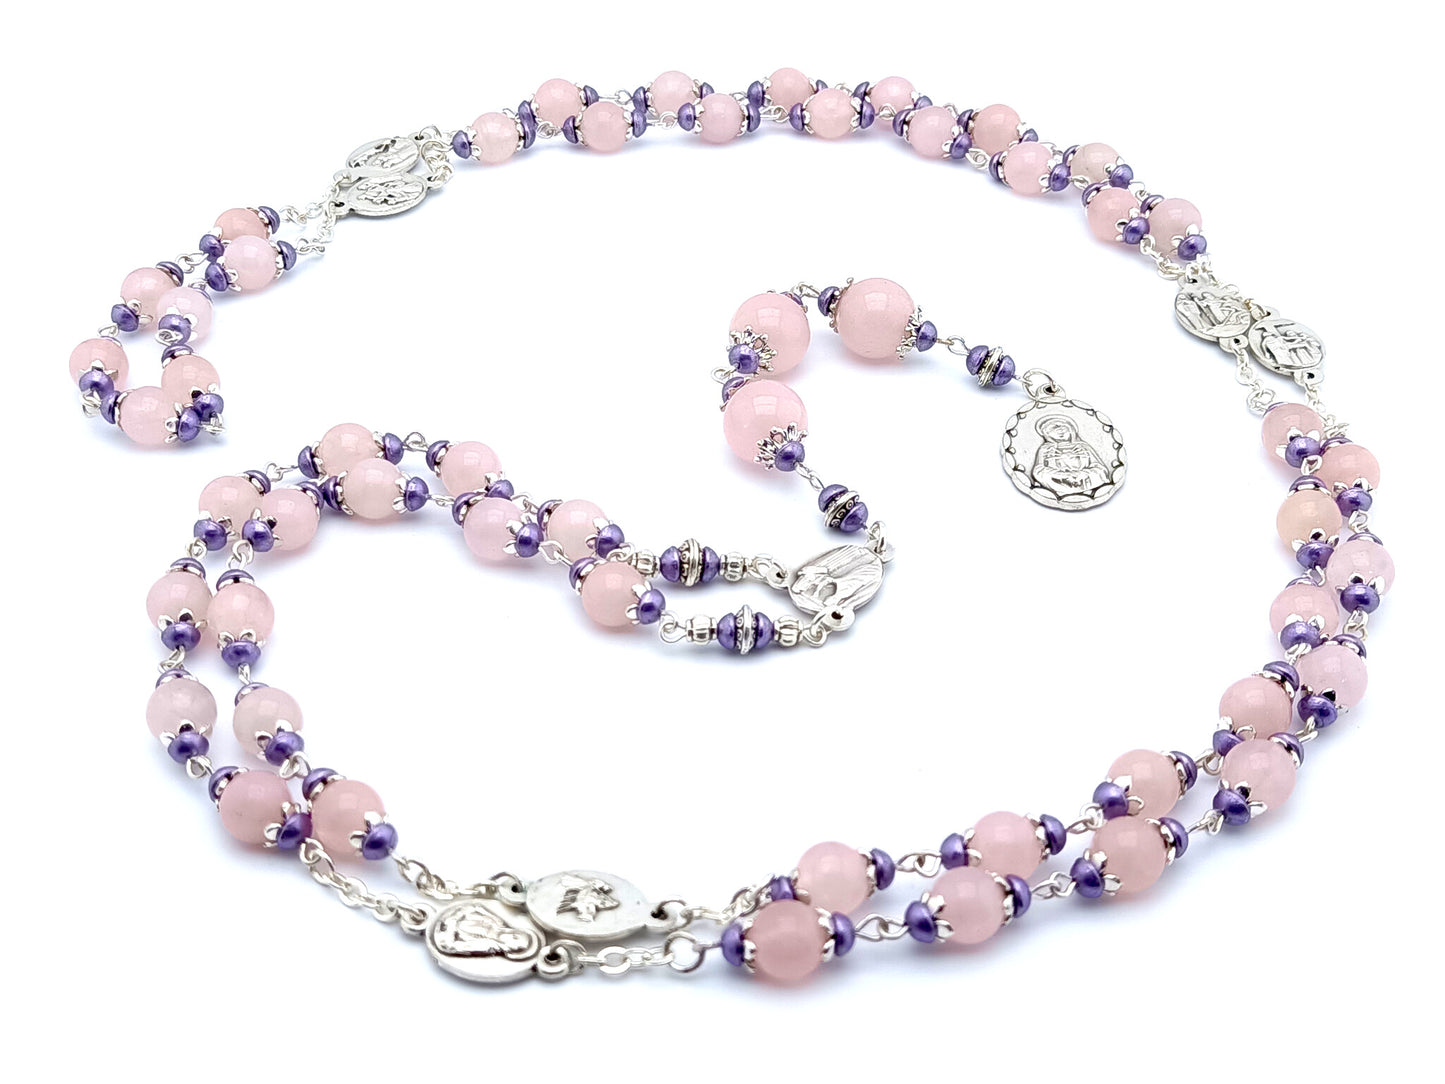 Our Lady of Sorrows unique dolor rosary beads with pale pink glass beads, silver dolour medals and purple bead caps. 